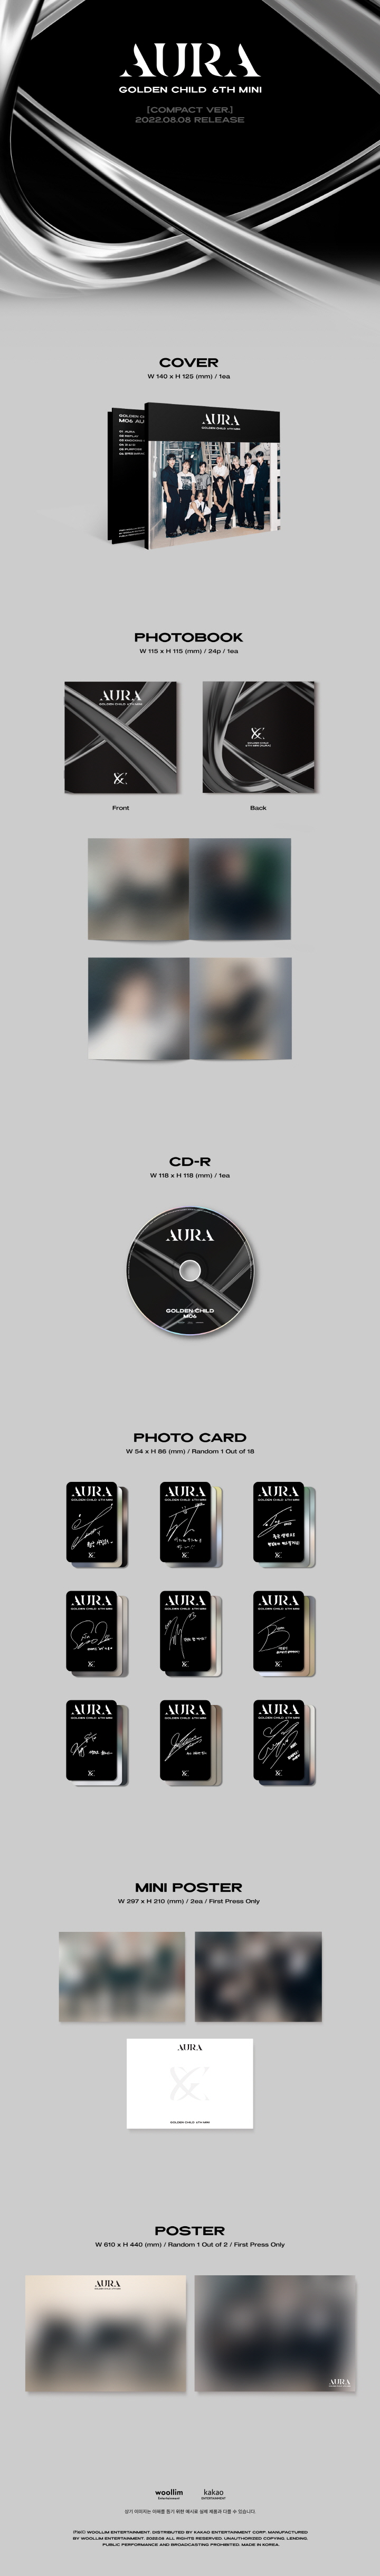 GOLDEN CHILD   AURA  Compact Ver  and  poster